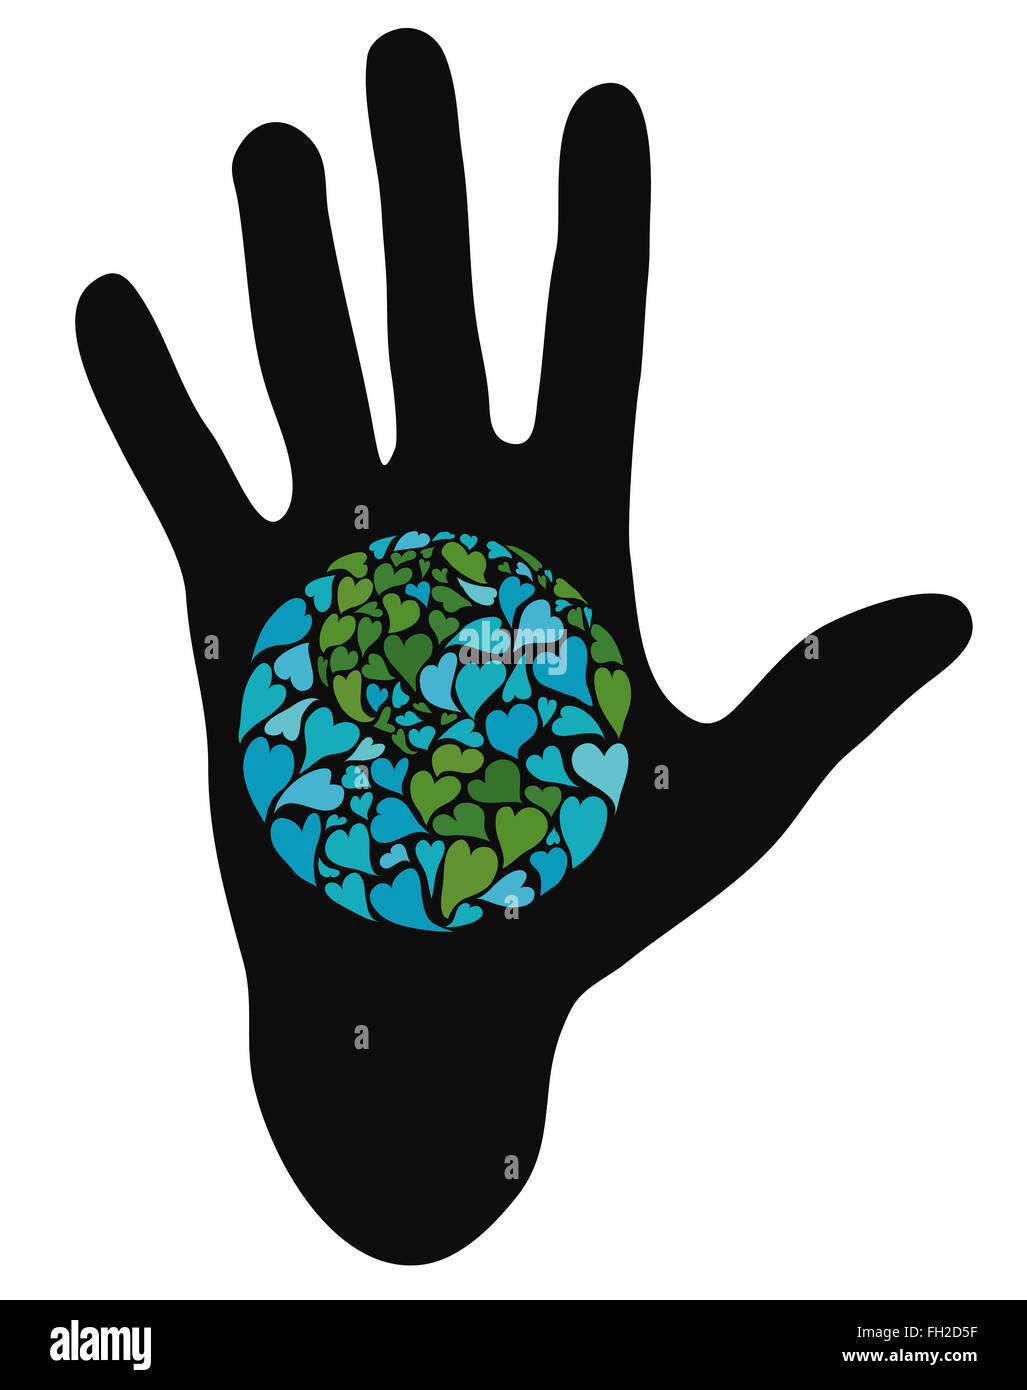 Hand showing planet earth made of hearts. Symbol of peace. America in the center. Stock Photo